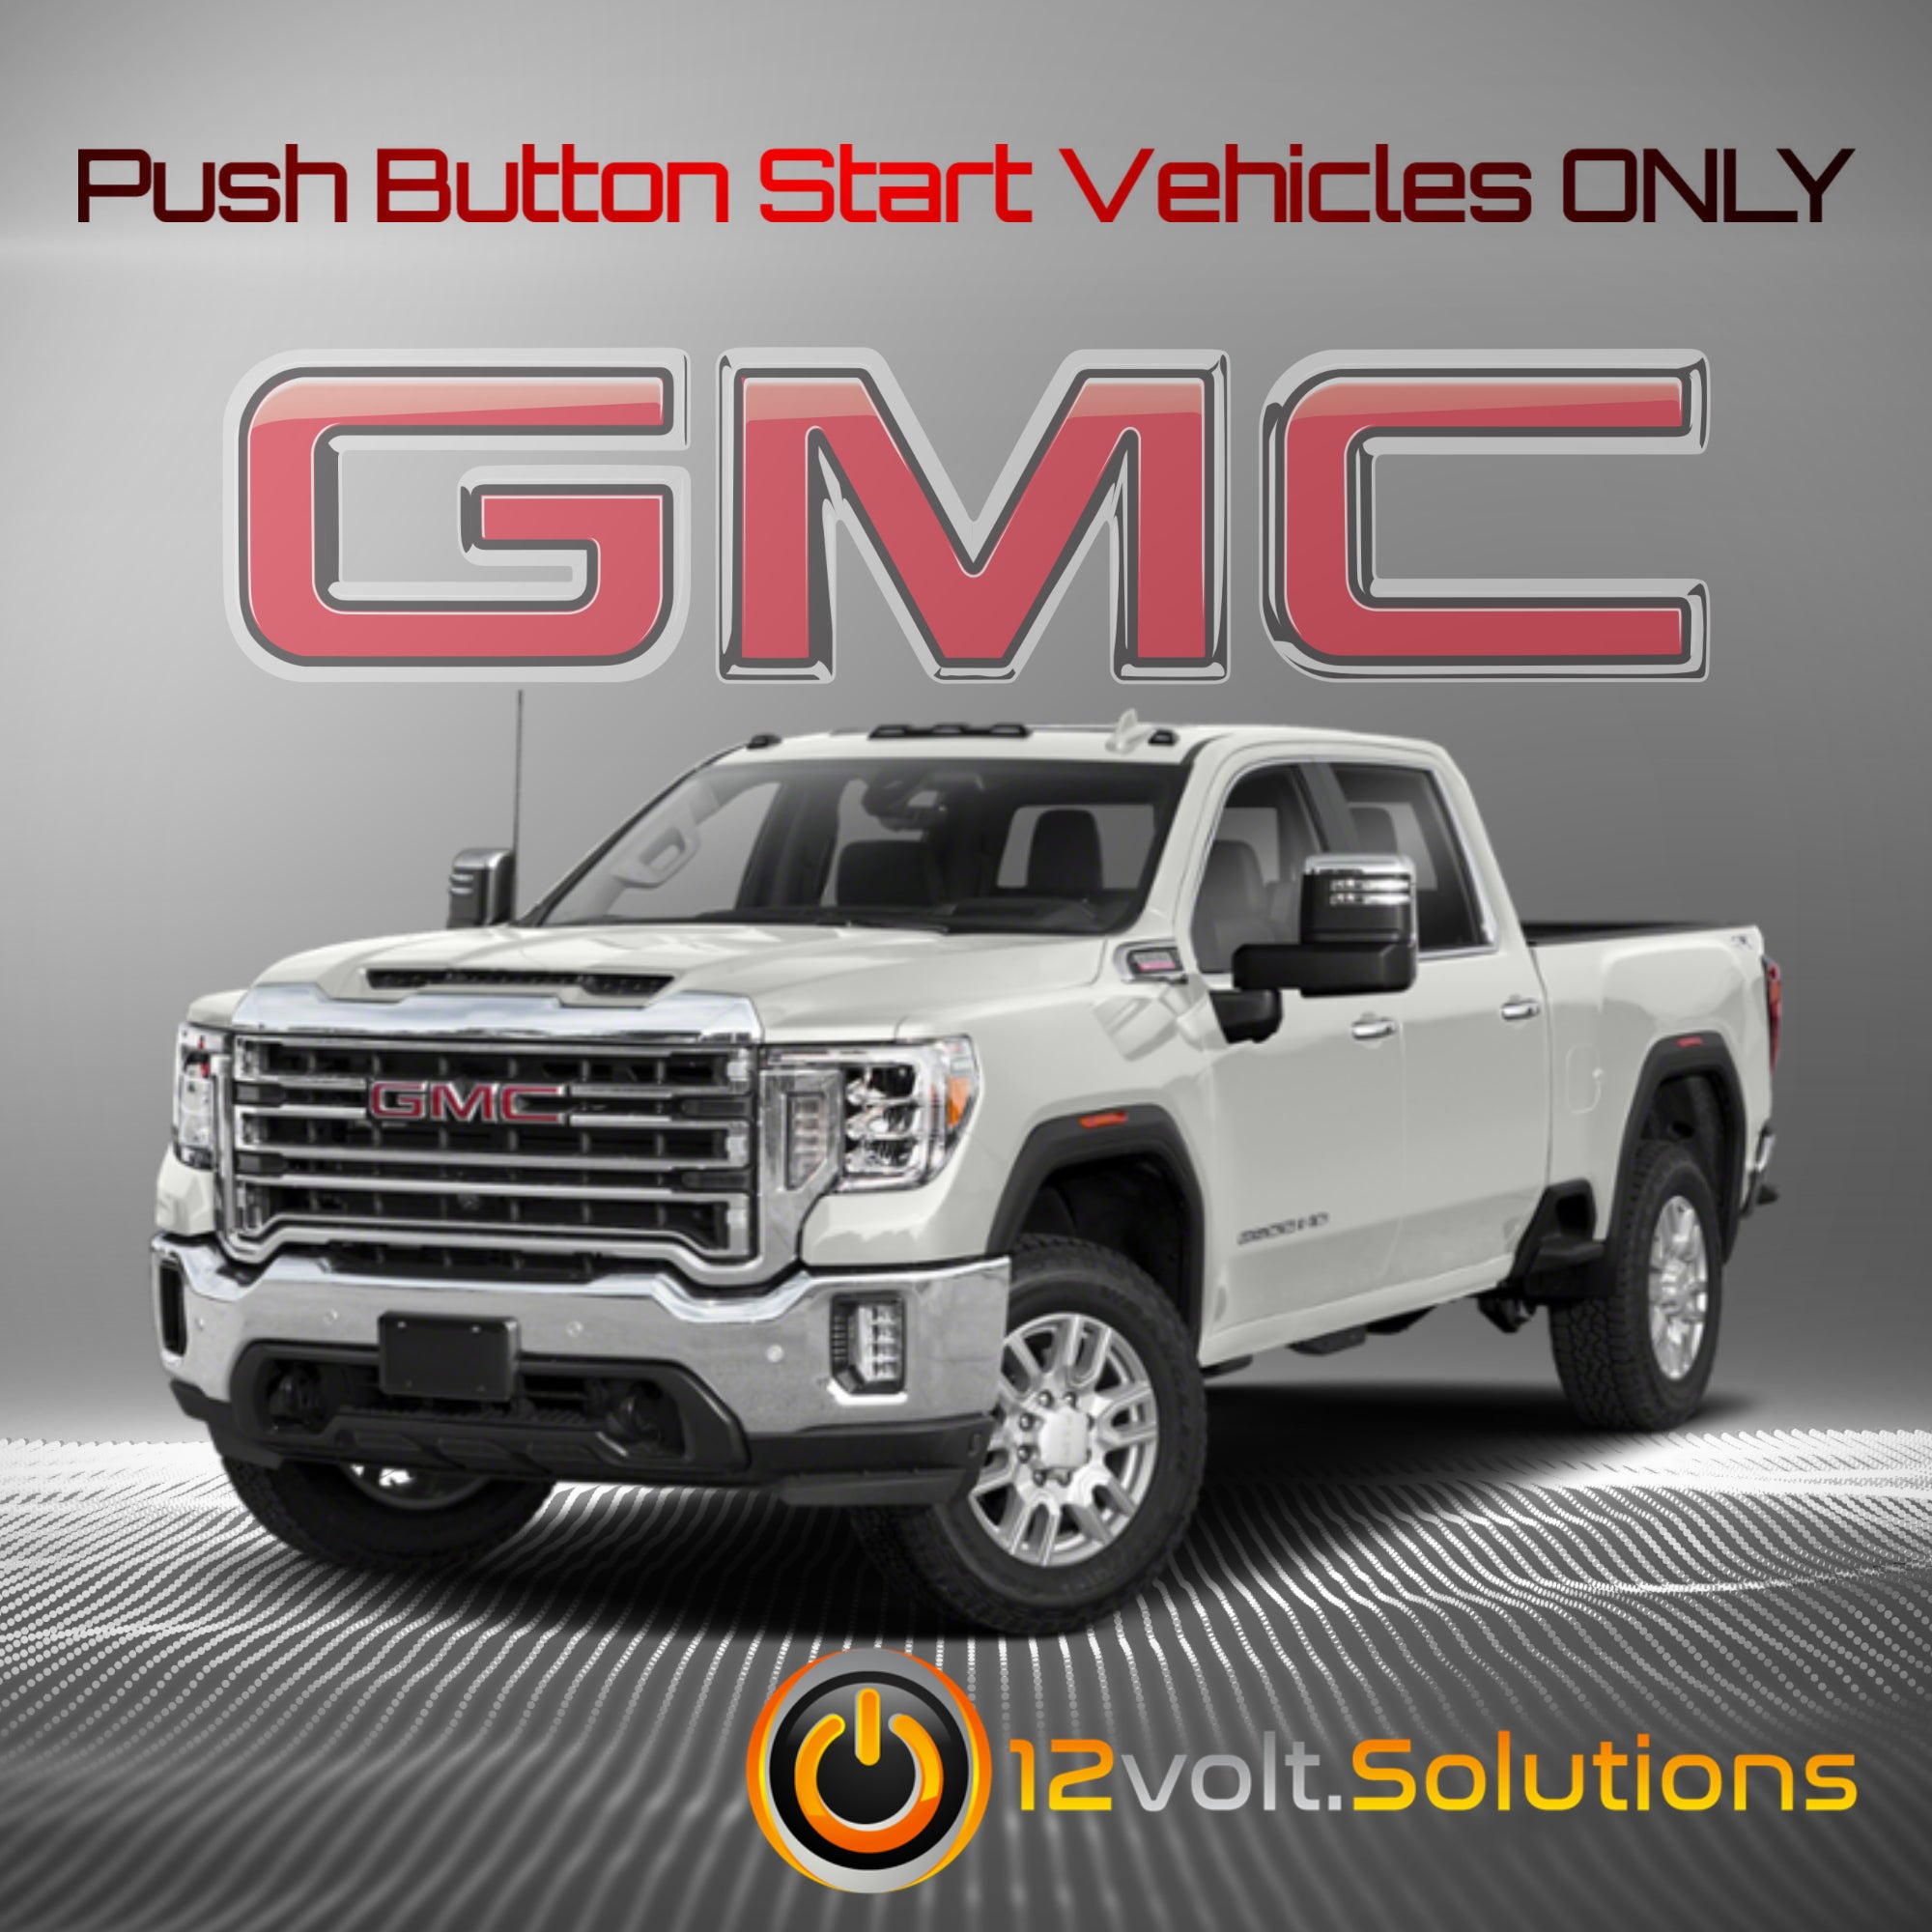 2020-2023 GMC Sierra 2500/3500 Plug and Play Remote Start Kit (Push Button Start)-12Volt.Solutions